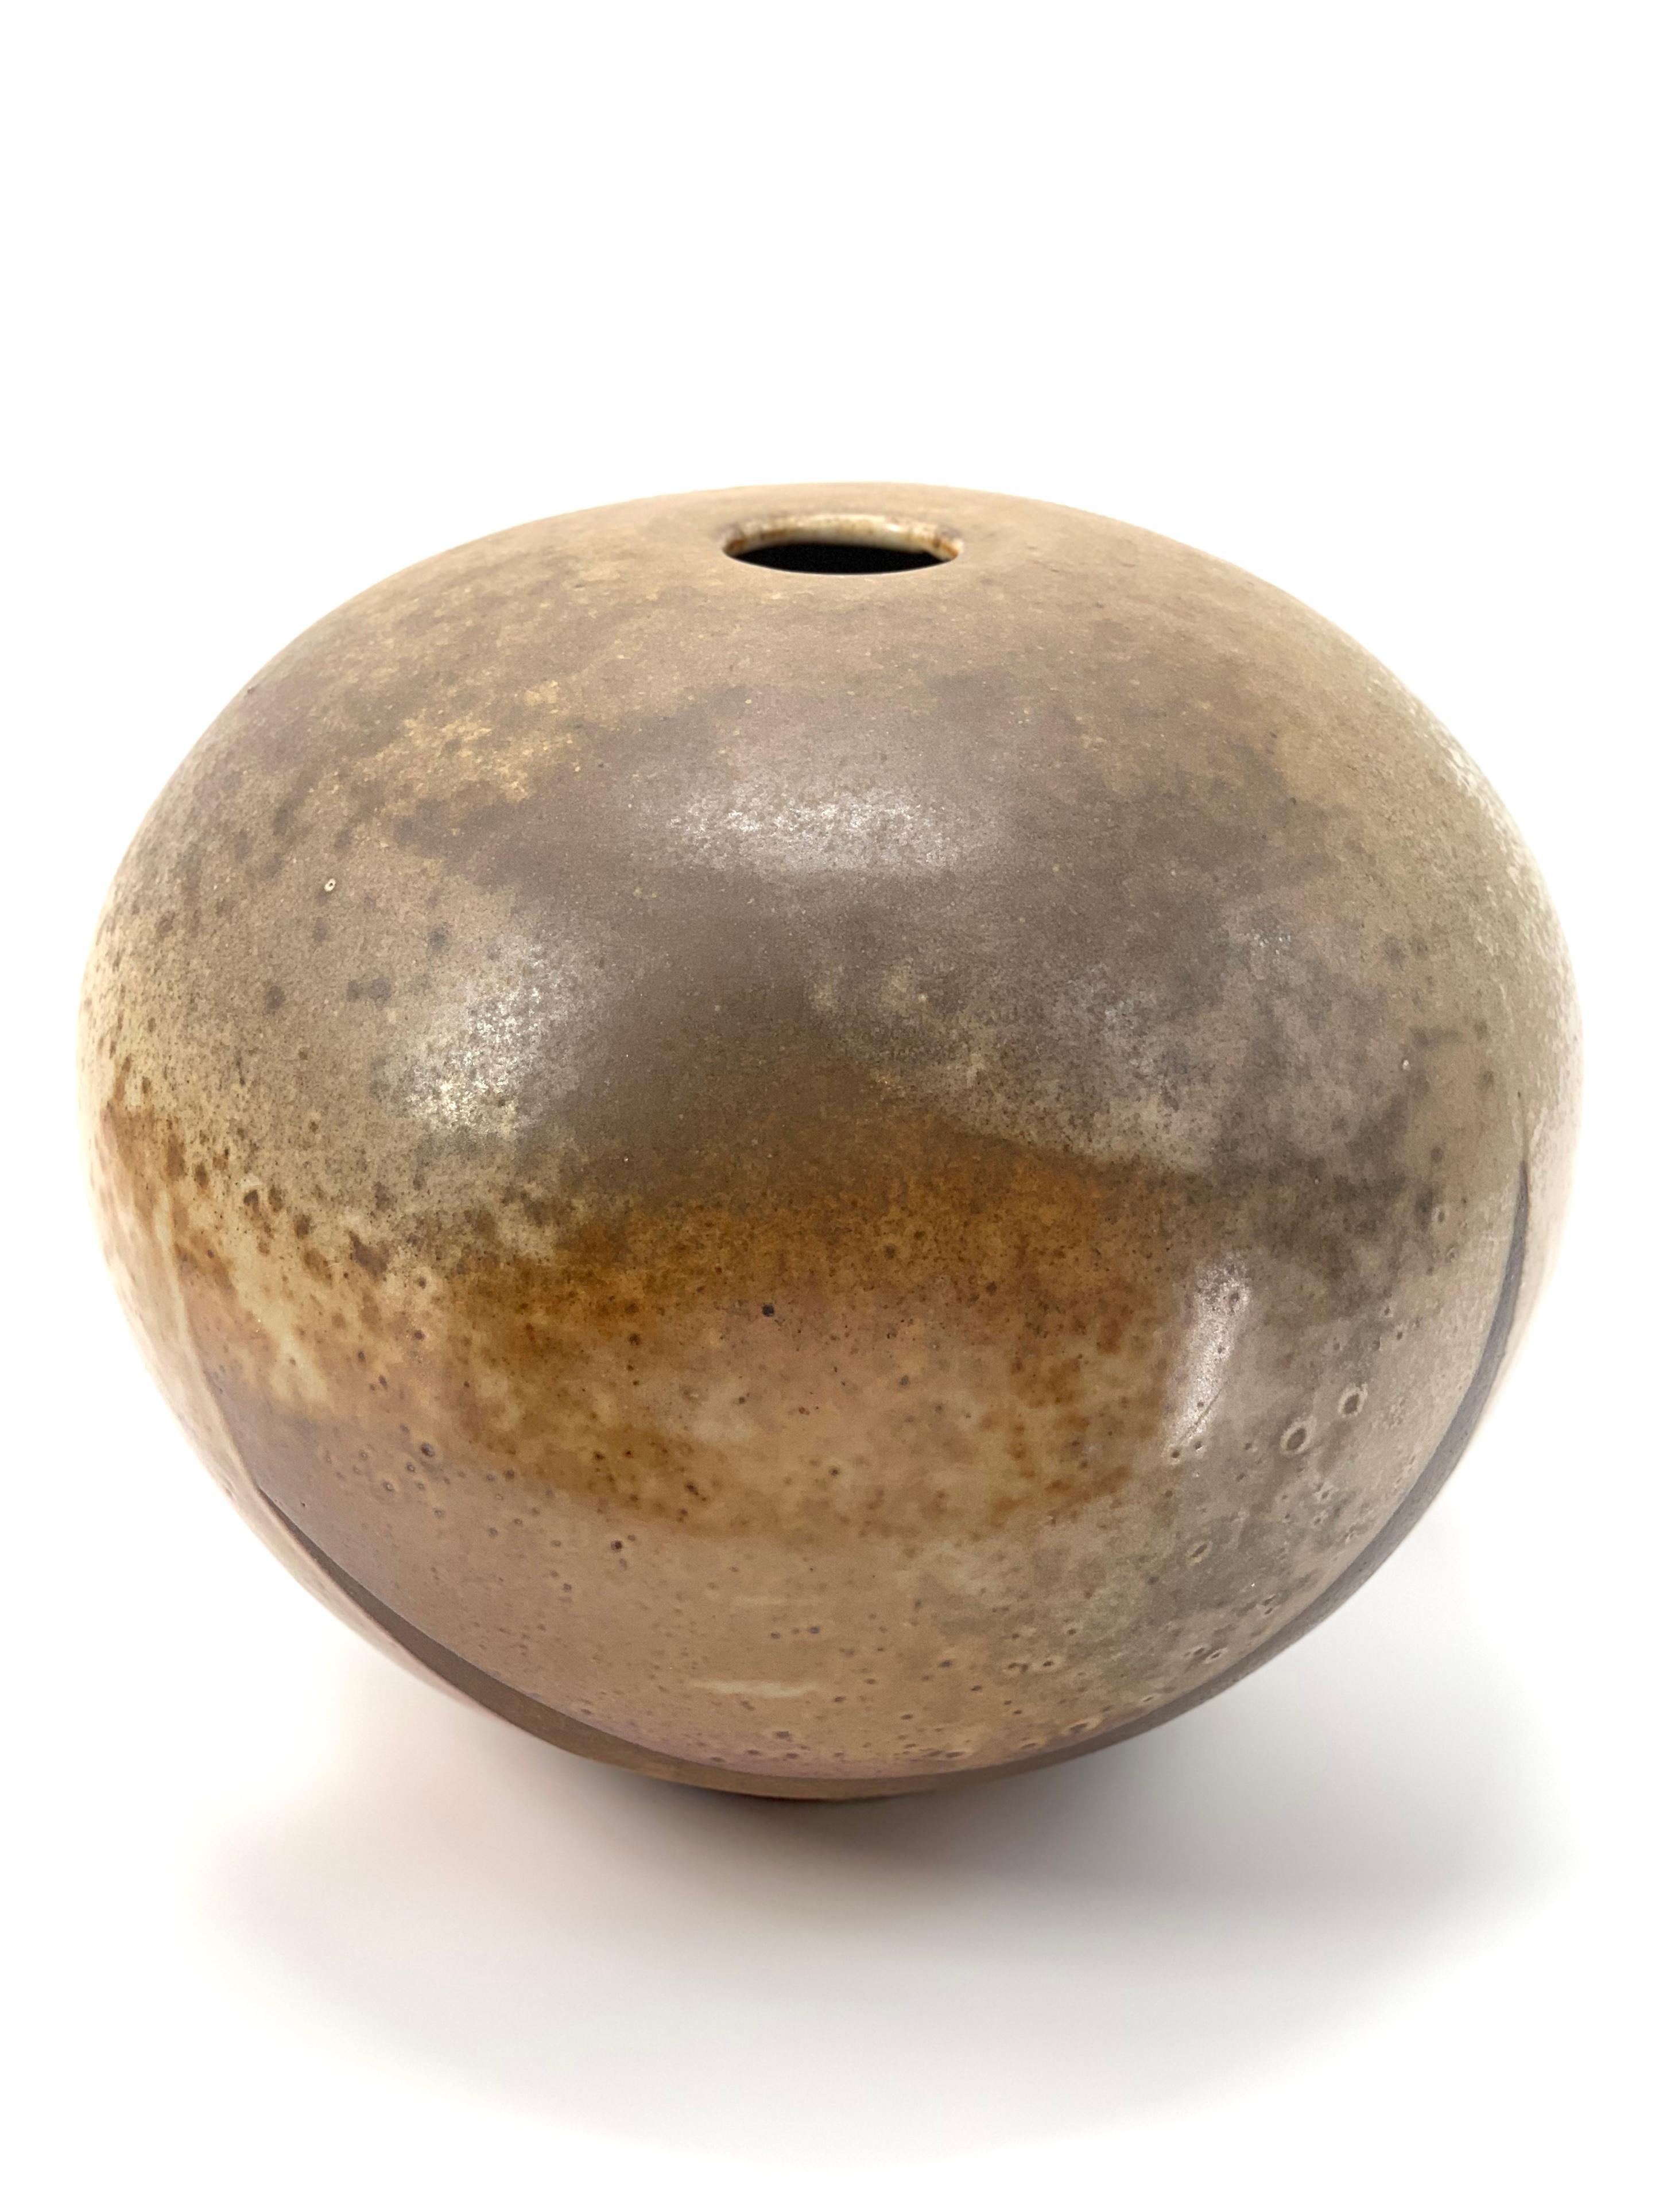 Spheresque (INV# NP3987)
Charles Davis
wood-fired stoneware and carbon trapped glaze
2012
signed

